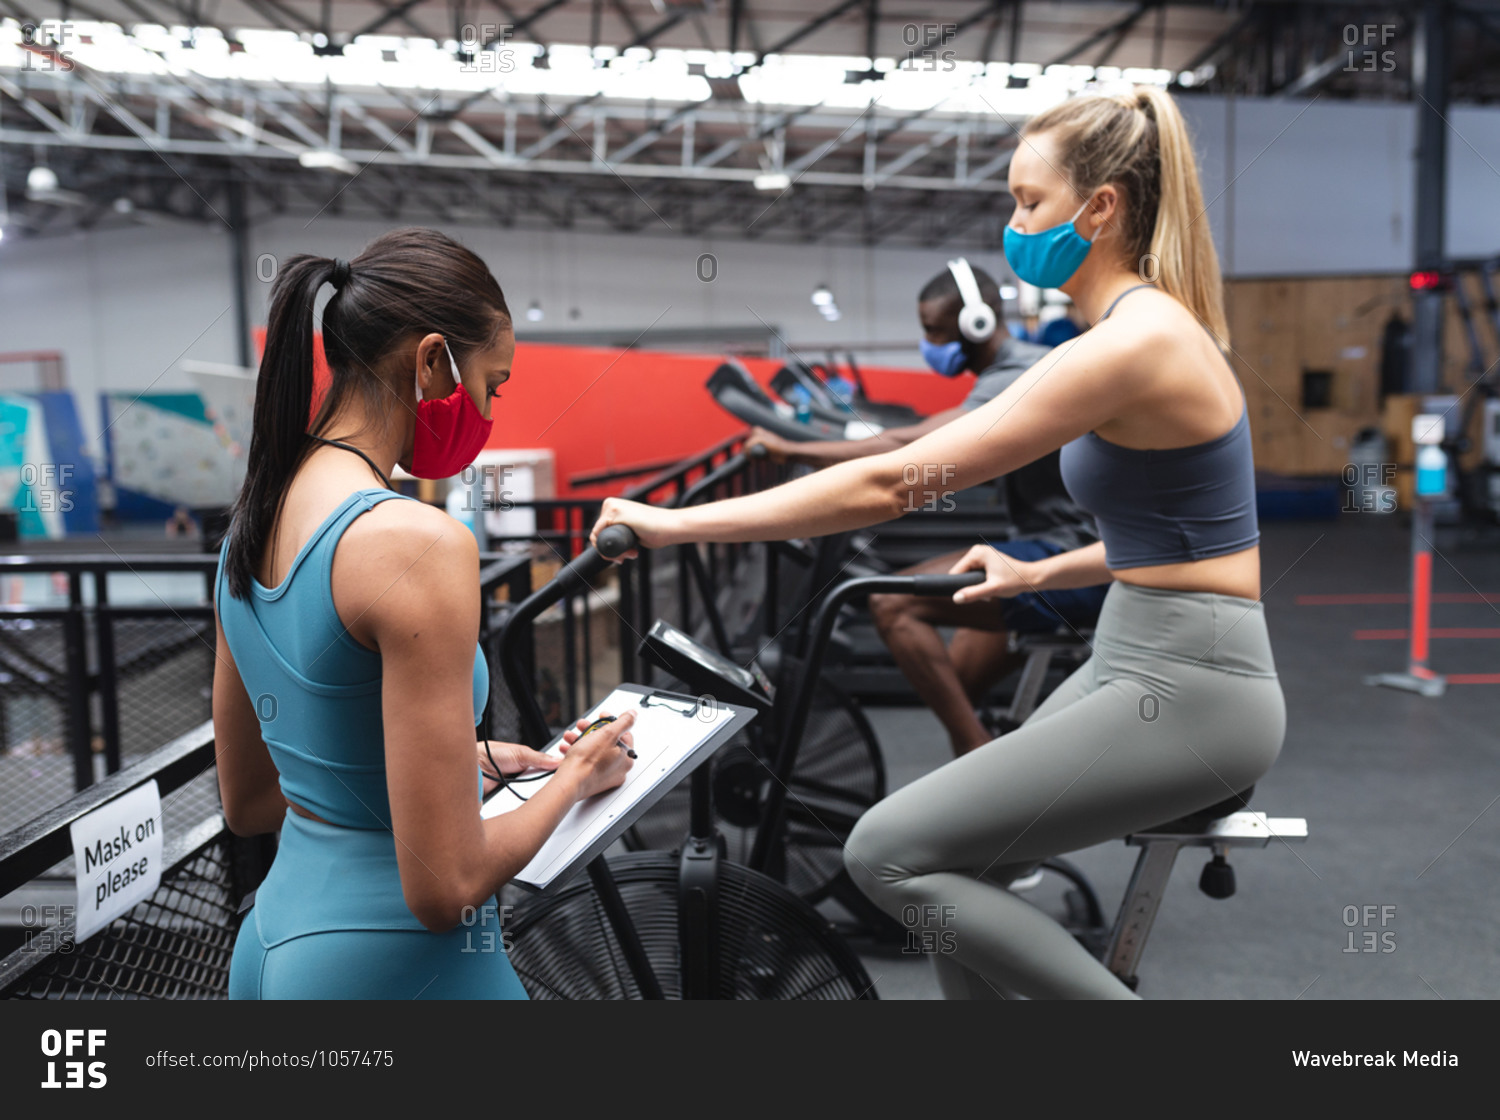 Fit caucasian woman wearing face mask exercising on stationary bike while caucasian female fitness coach taking notes on clipboard in the gym.